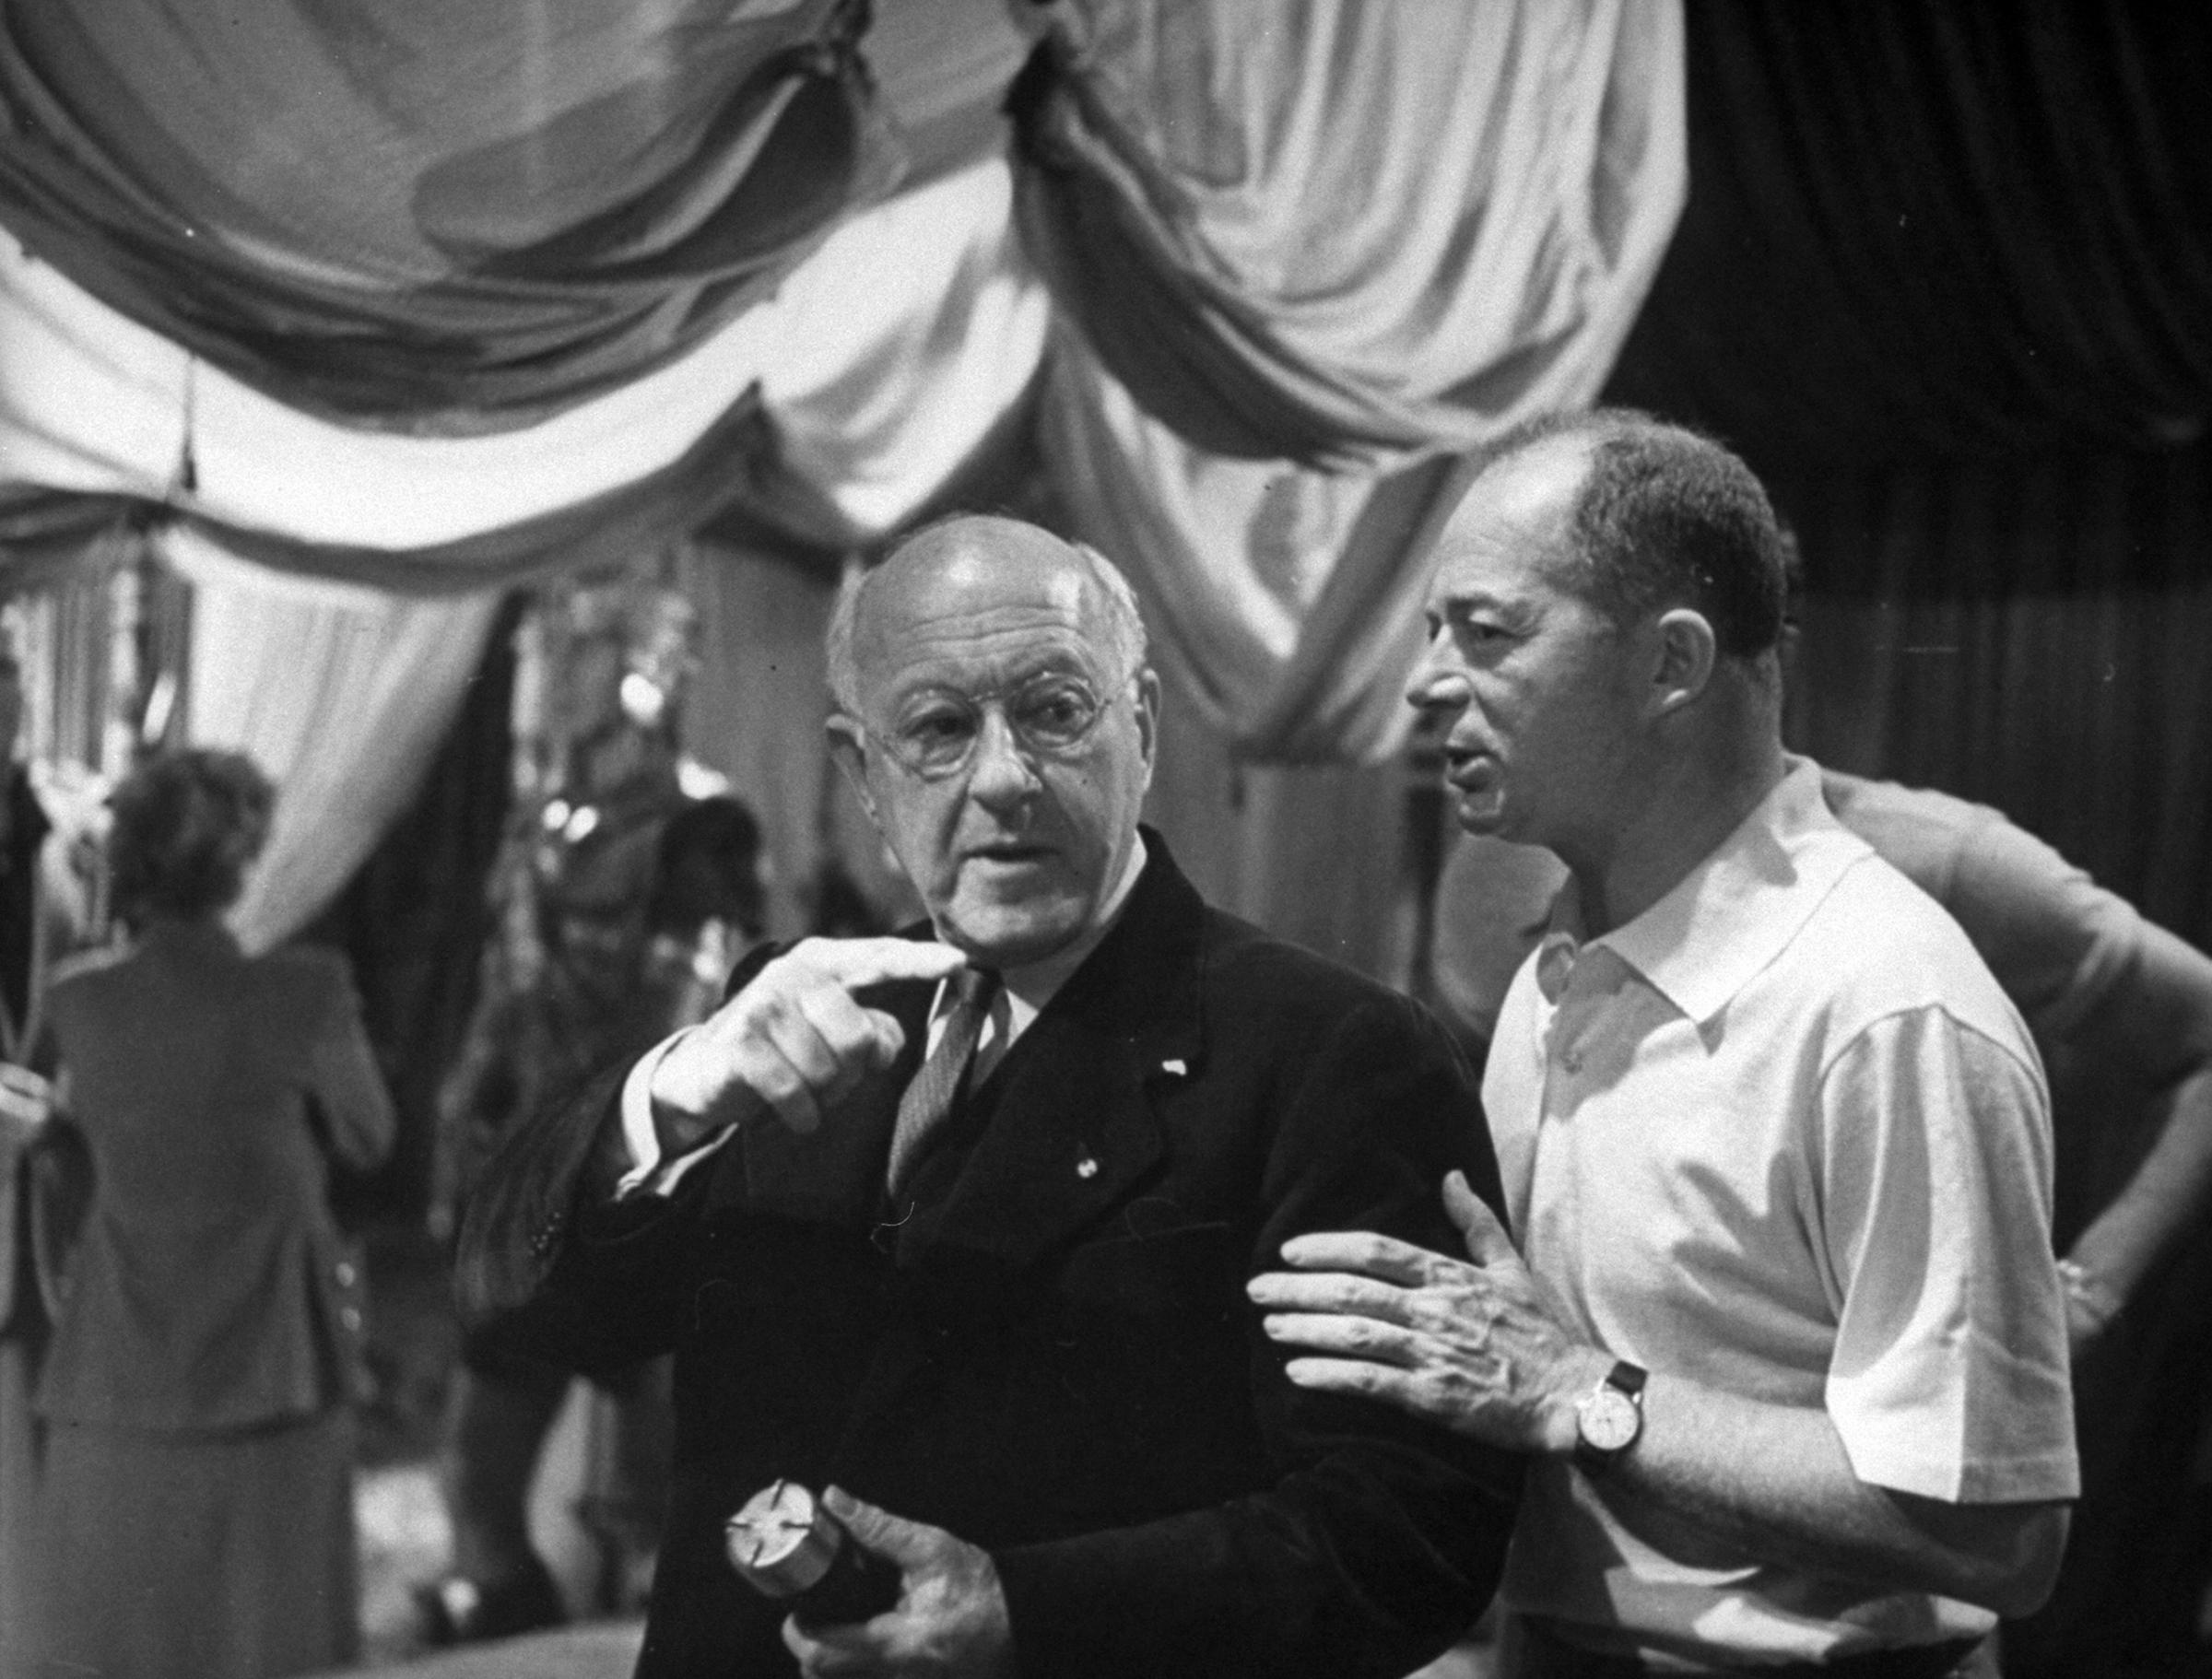 Billy Wilder and Cecil B. DeMille talking during the filming of "Sunset Blvd,' 1949.